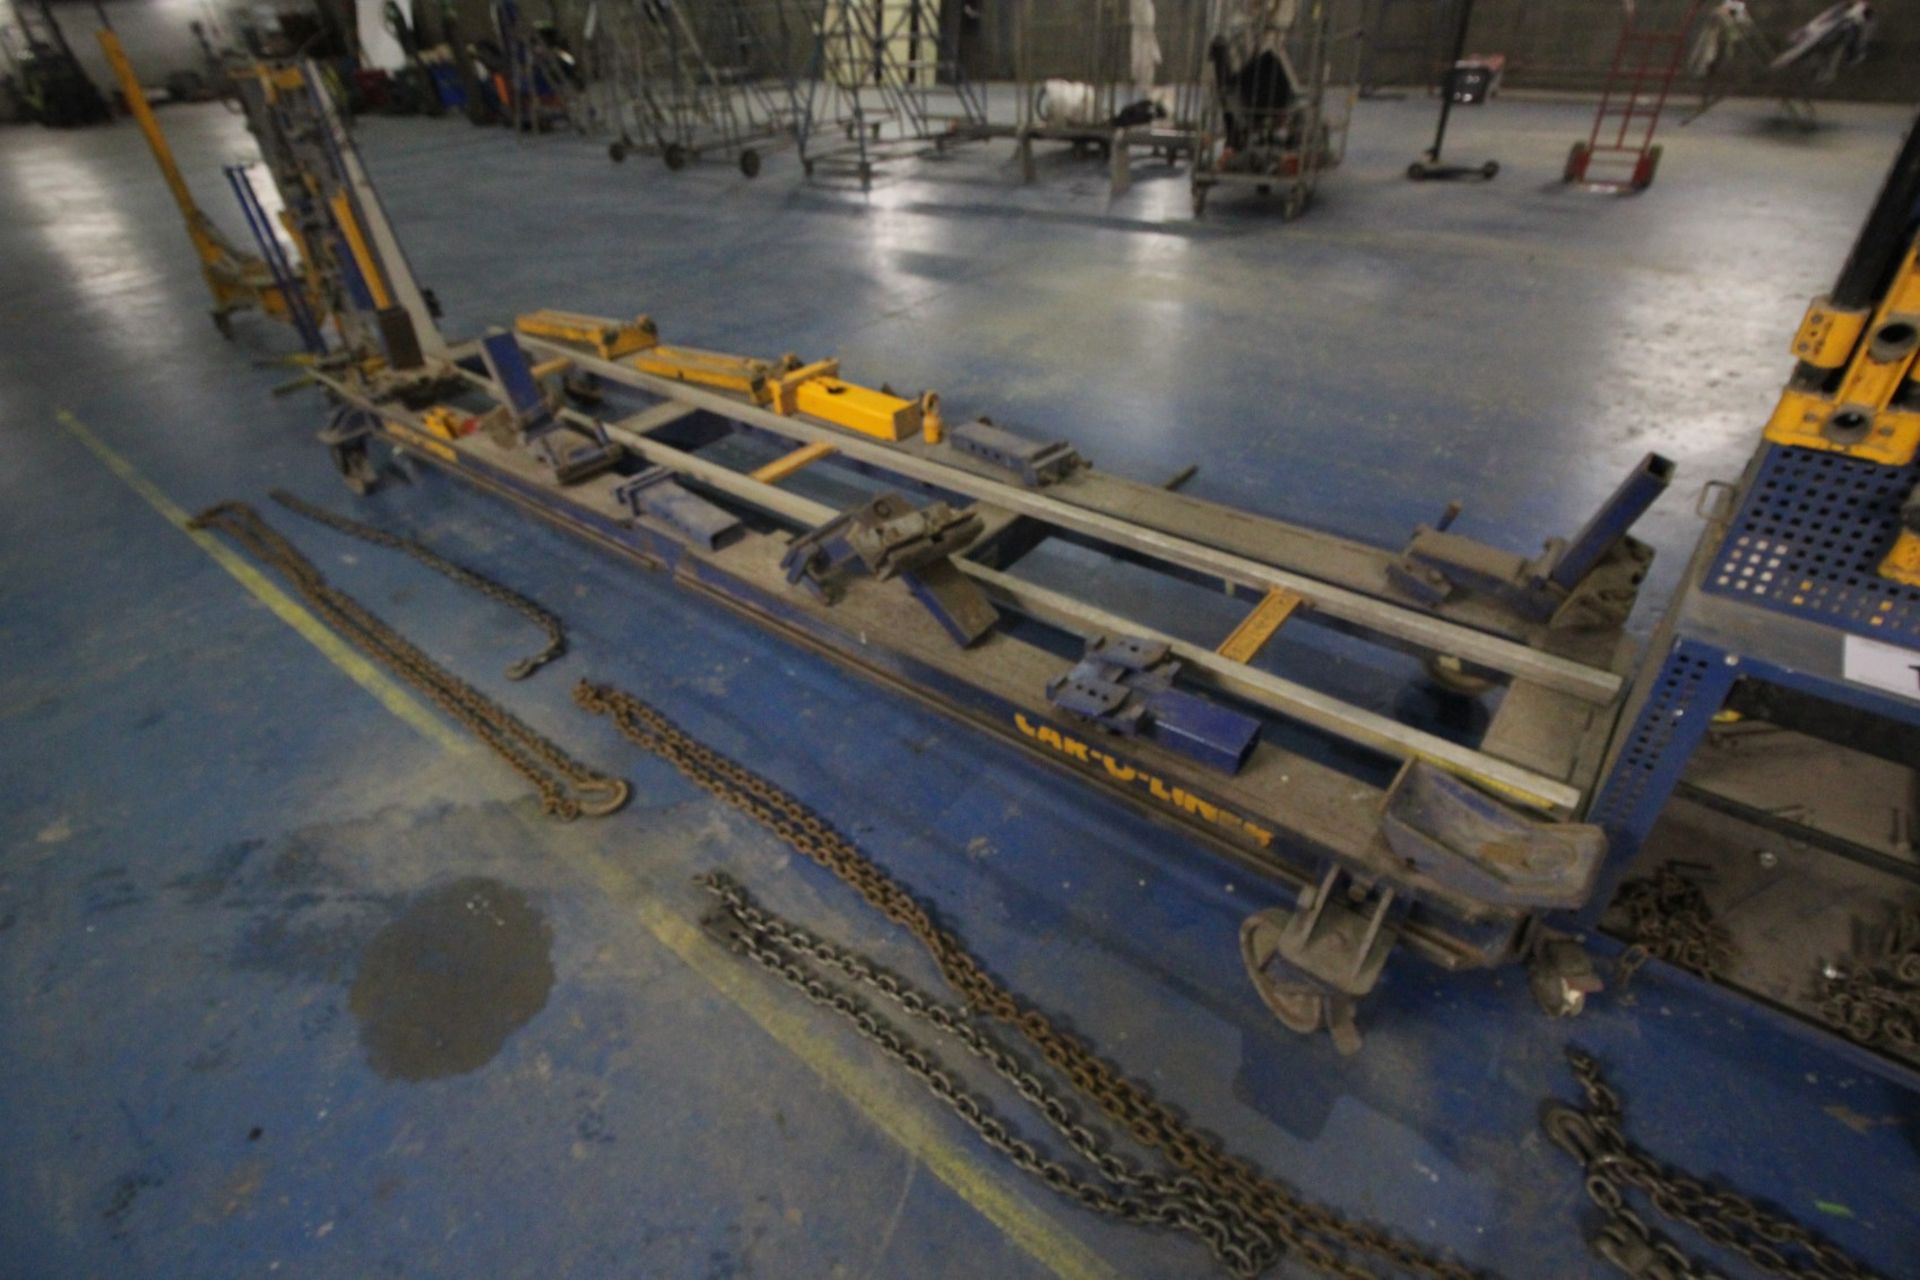 CAR-O-LINER VEHICLE BODY PULLING JIG, SERIAL NO. 1310100000, INCLUDING 4-WHEEL, HEAVY METAL FRAME, - Image 3 of 6